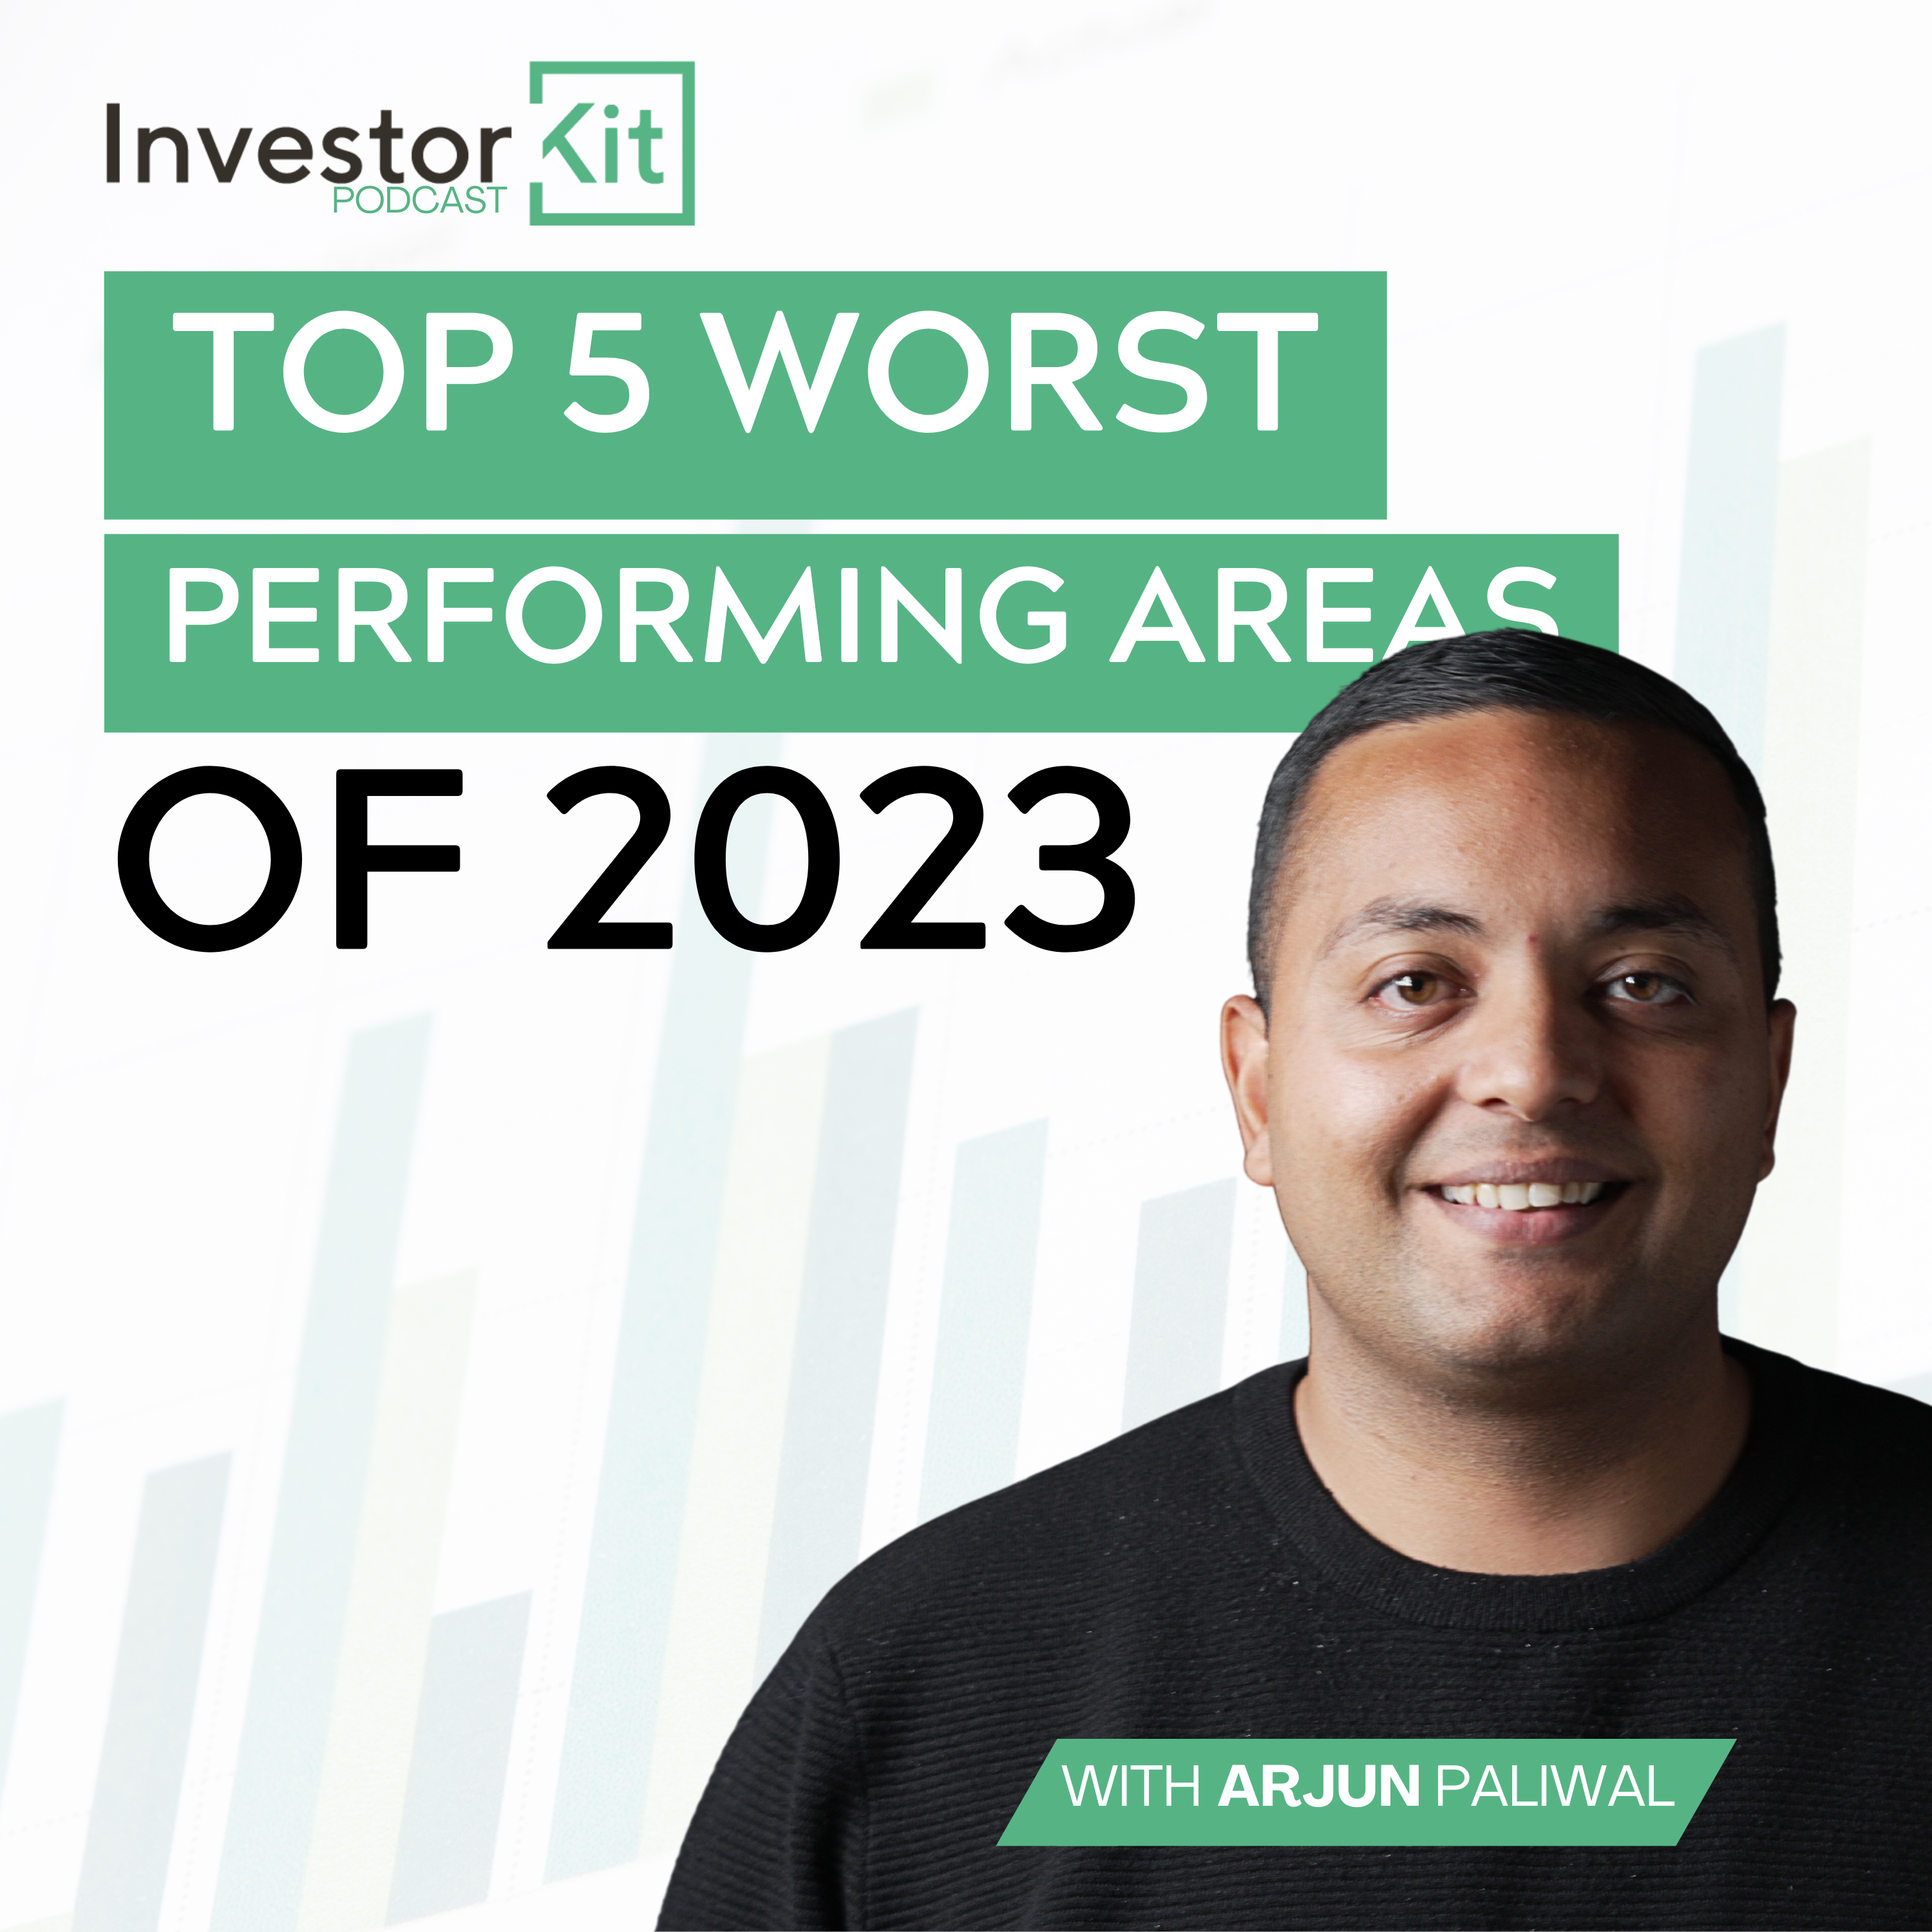 Top 5 Worst Performing Areas of 2023 And How You Can Spot Them